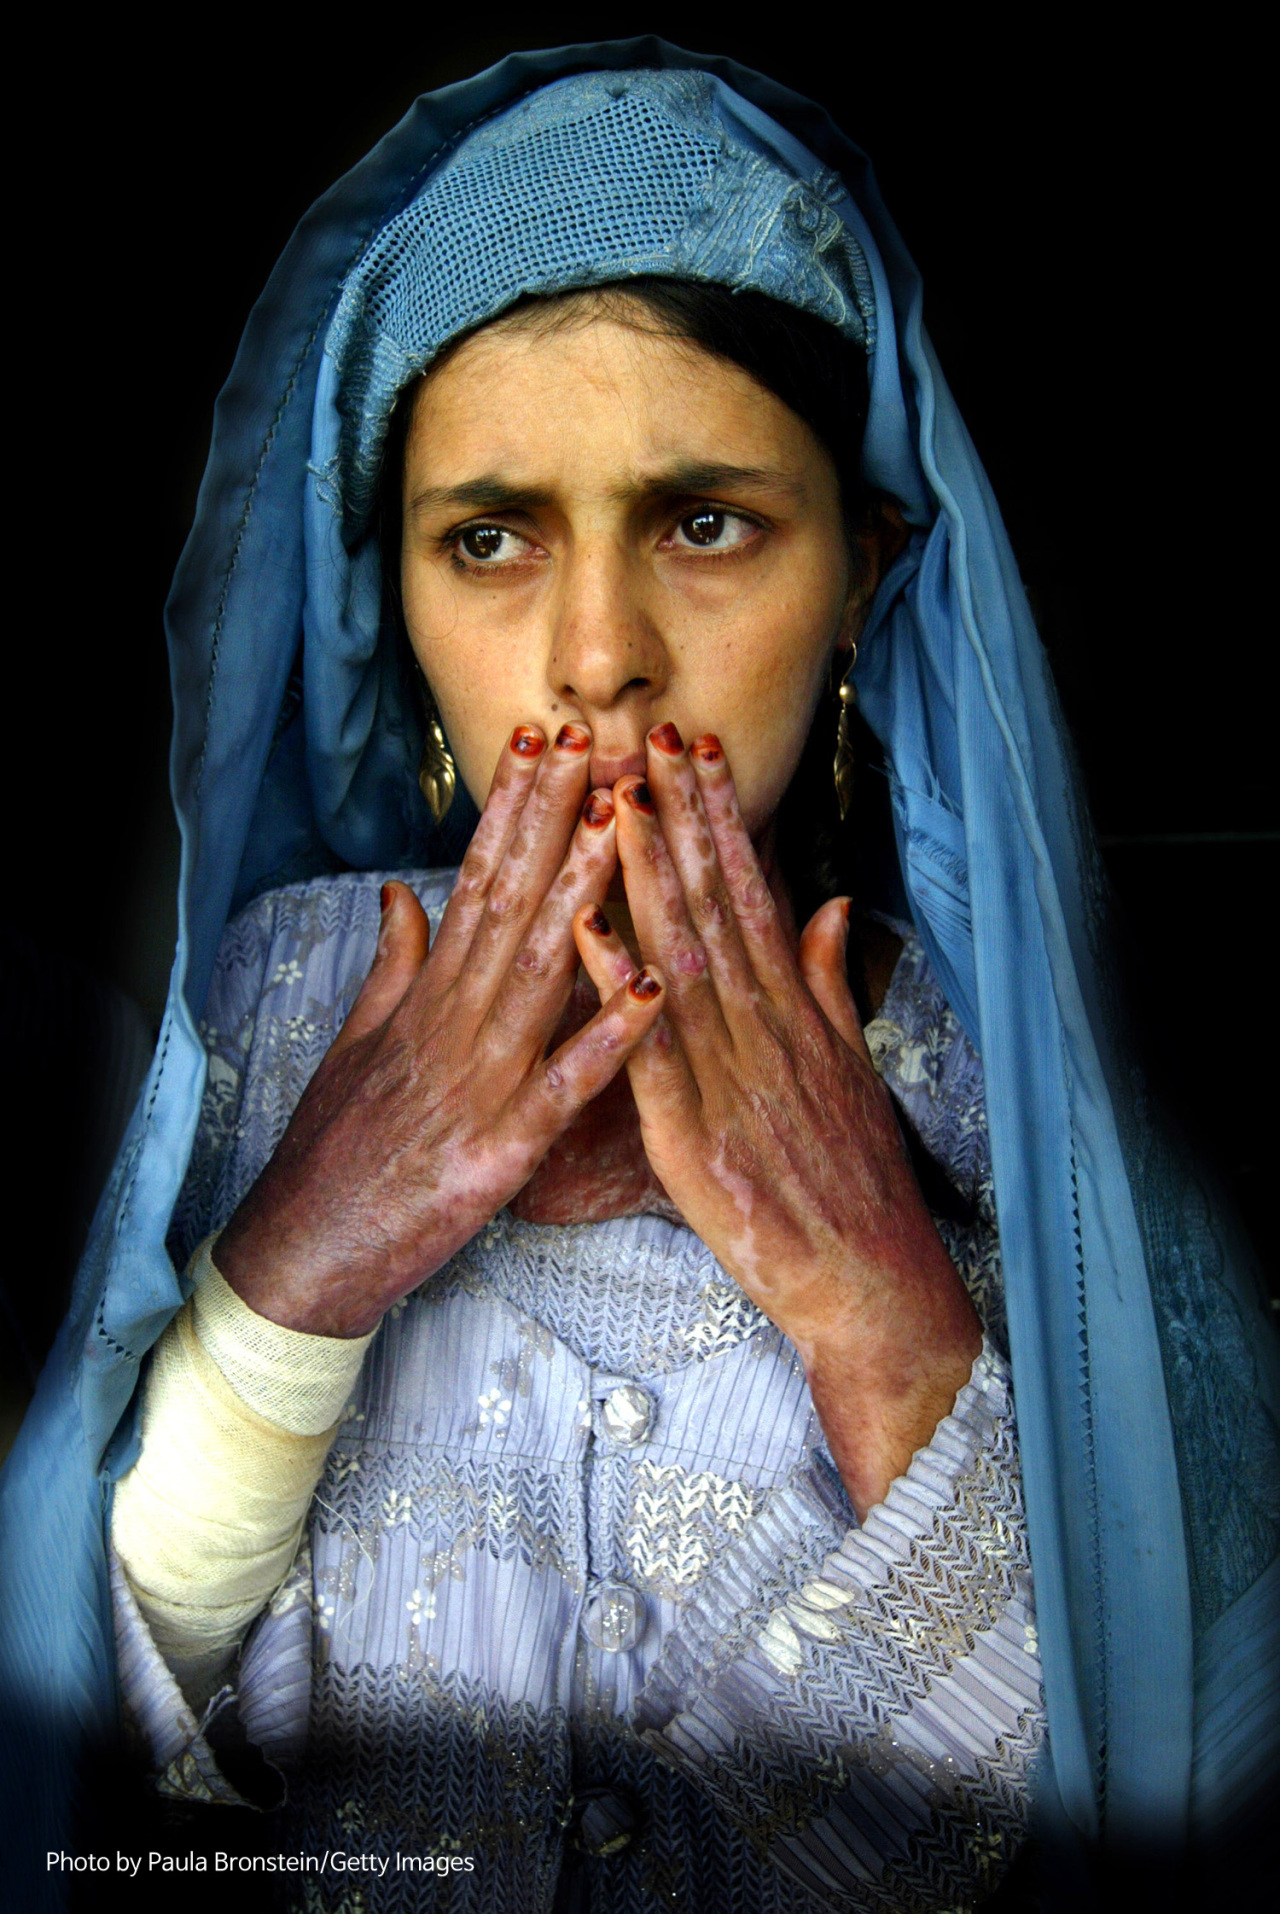 “Desperation Drives Women to Self Immolation in Herat” by Paula Bronstein (Getty Images)